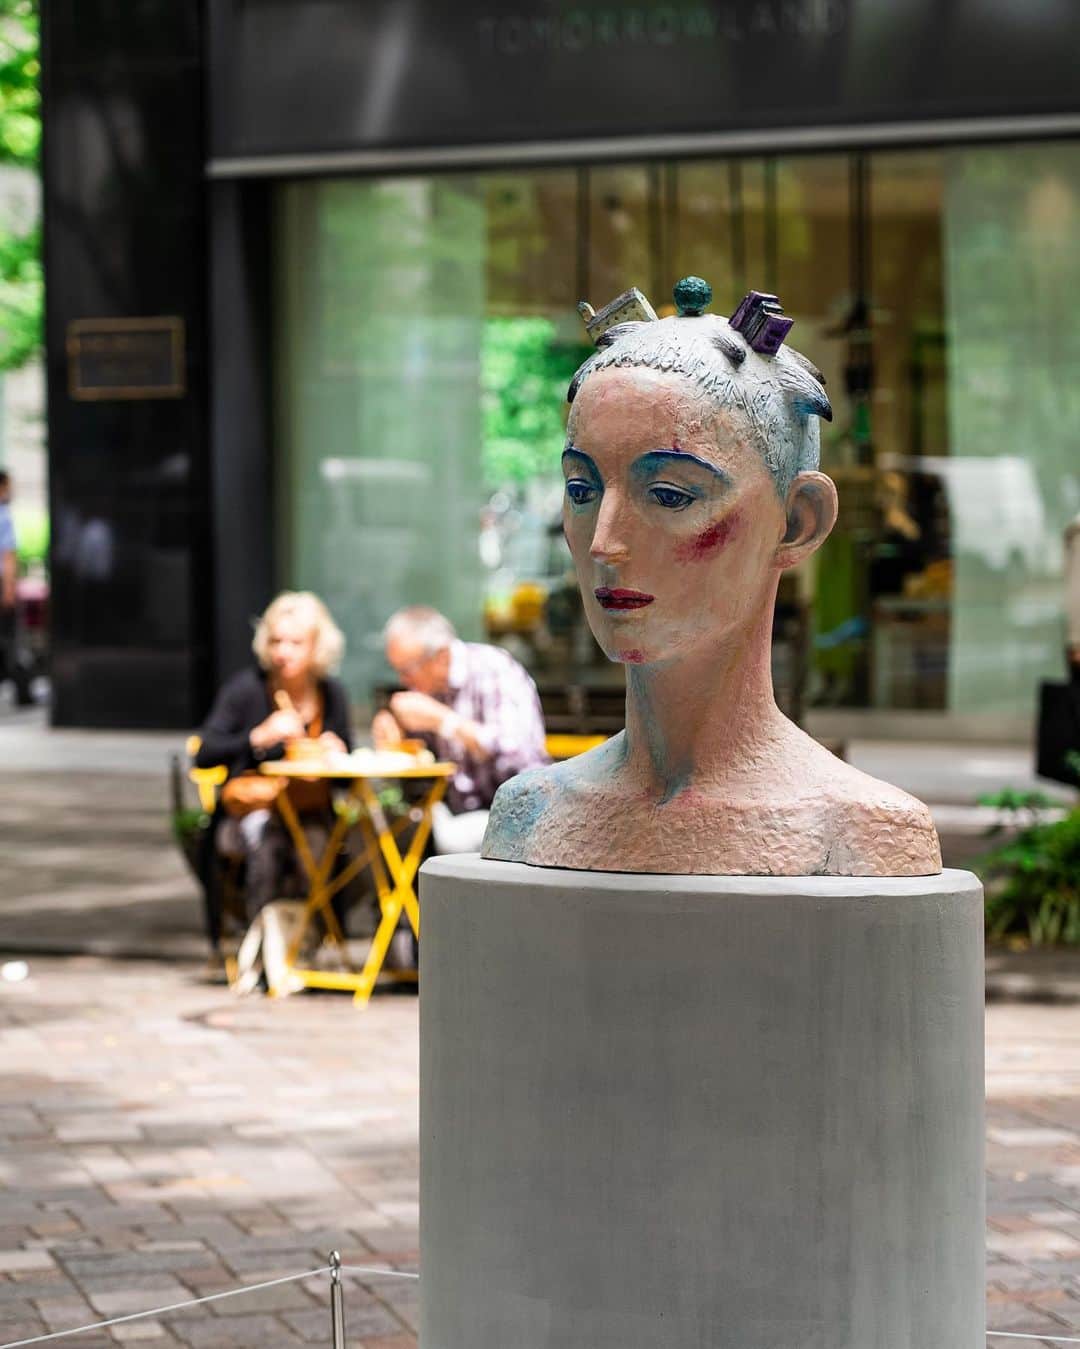 Promoting Tokyo Culture都庁文化振興部のインスタグラム：「Marunouchi is an area where an array of public art adorns the streets. This district isn't just a hub for offices and shopping, it's also emerging as a fresh artistic hotspot in Tokyo.  -  街中を様々なパブリックアートが彩る丸の内。 オフィス街・ショッピング街としてのみならず、東京の新たなアートスポットとしても注目されています。  #tokyoartsandculture  #marunouchi #marunouchistreetgallery #丸の内 #丸の内ストリートギャラリー #artoftheday #fineart #artstagram #artlover #fineartphotography #art_of_japan_ #artjournal #artworld #artphoto #arthistory #finearts #artworkoftheday #artandculture #artsandculture #artculture #instaartlovers #loveofart #artexperience #culturalexperience #artlovefeed #cultureofcreatives #creativeart #publicart #publiccliations #publicartwork」